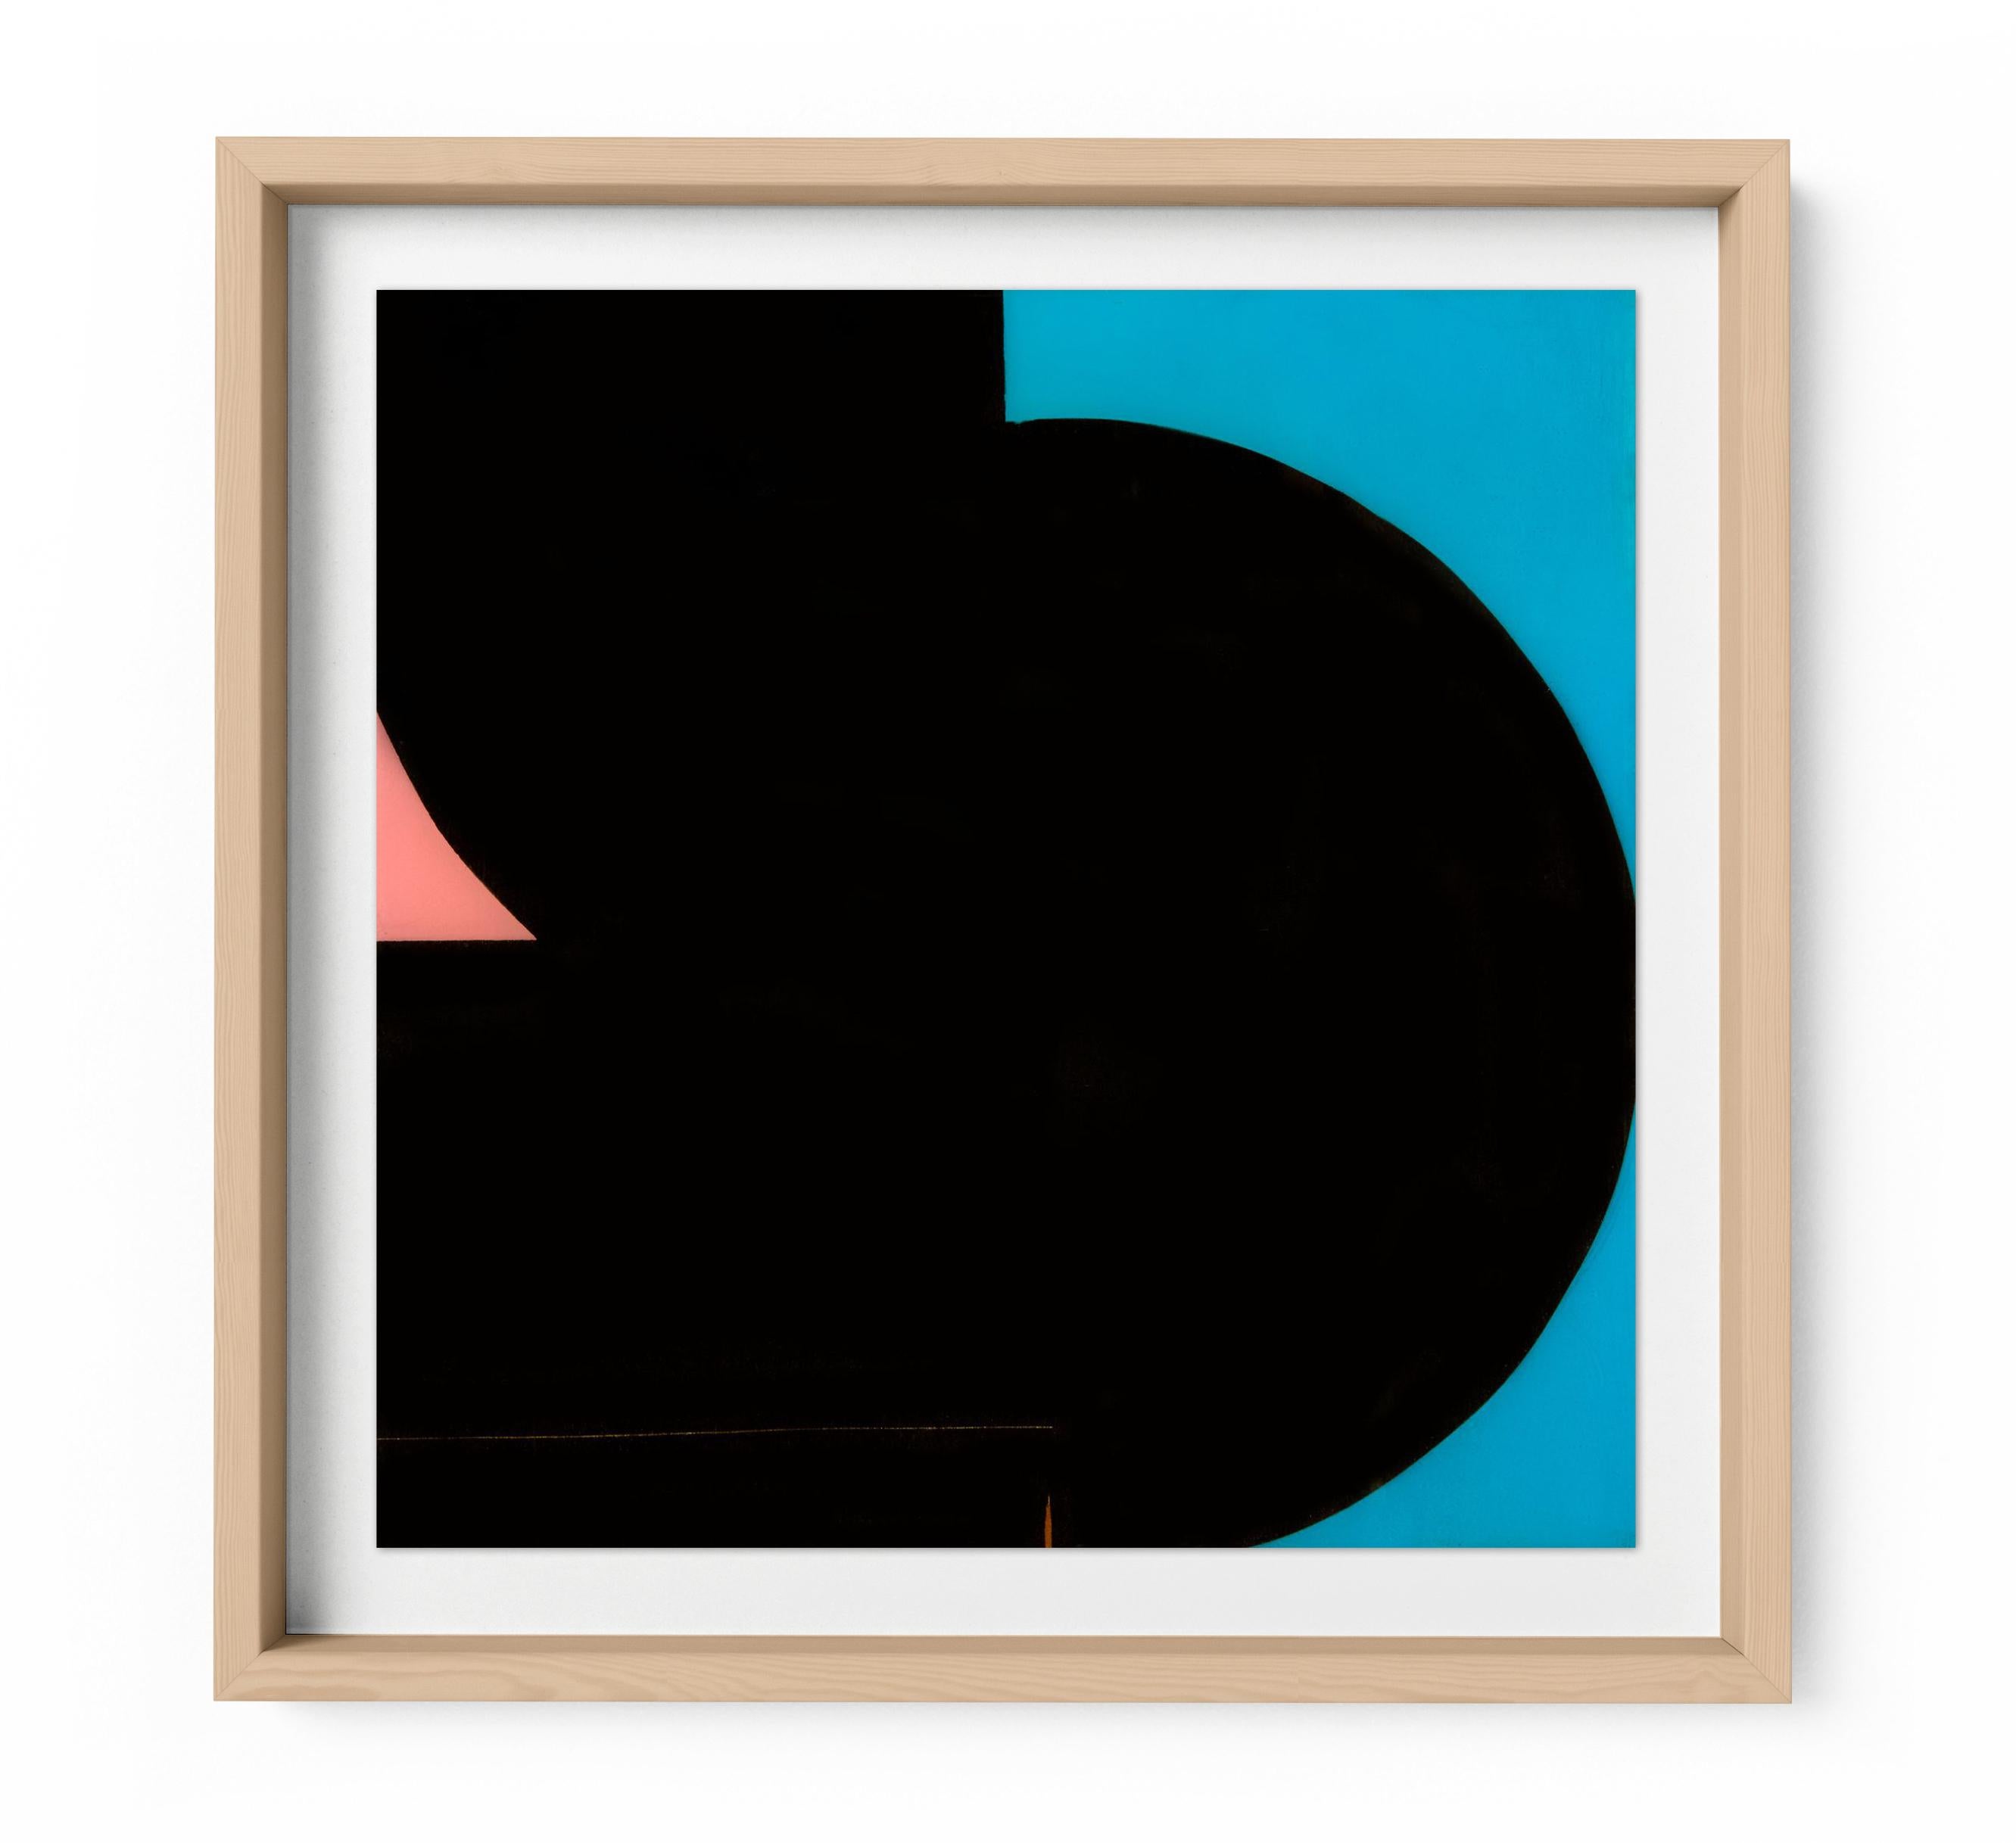 Baseline is a framed signed limited edition contemporary print by iconic Los Angeles-based visual artist and one of LA's original Graffiti artists Karlos Marquez. It features vibrant colors and abstract mixed media on high quality fine art paper.  